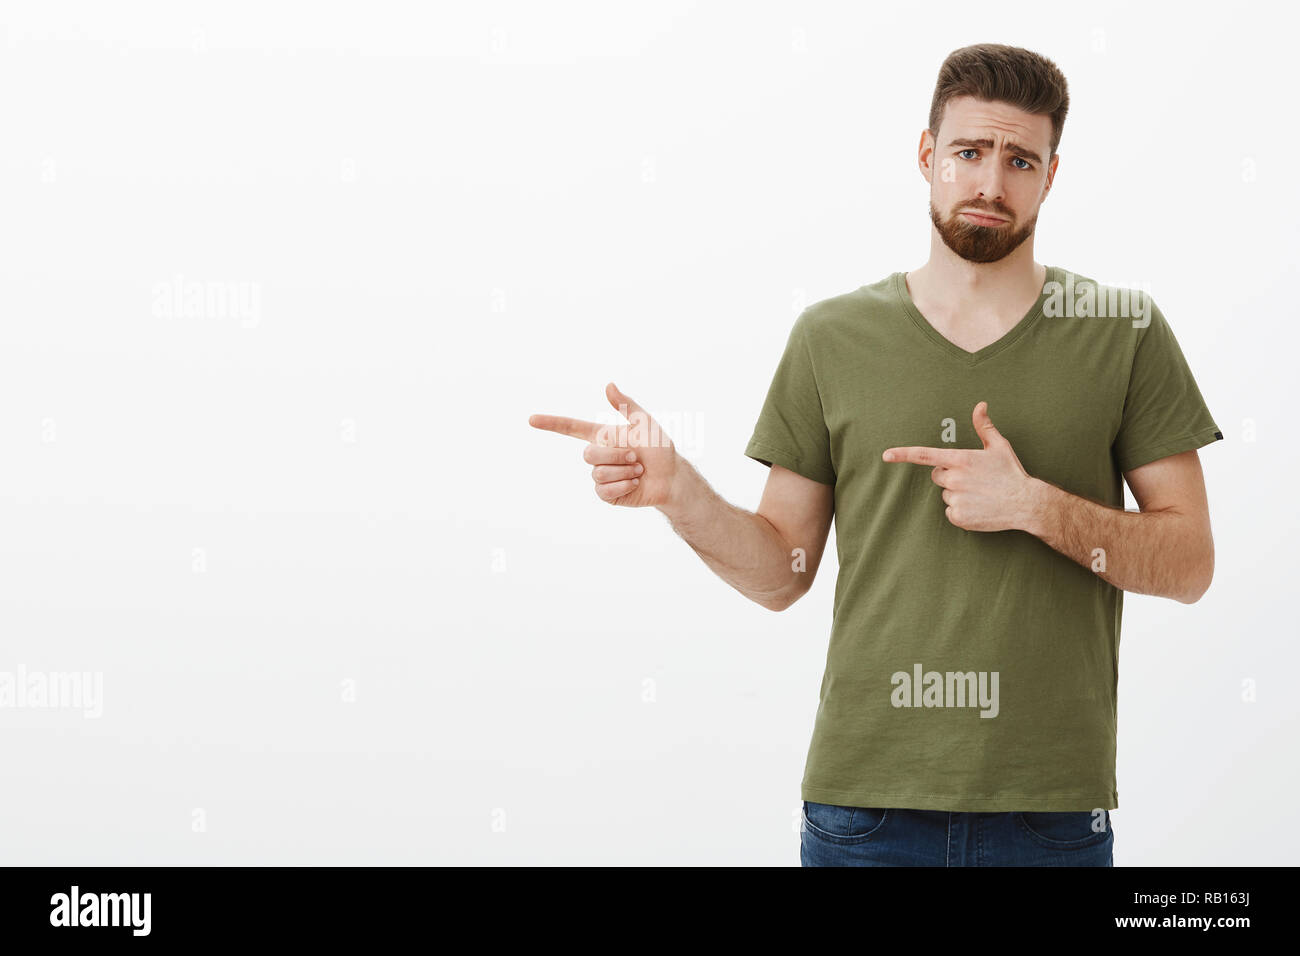 Cute unhappy and upset boyfriend pouting and frowning like gloomy puppy as pointing left disappointed and jealous of not having awesome product as present of valentines day over white wall Stock Photo